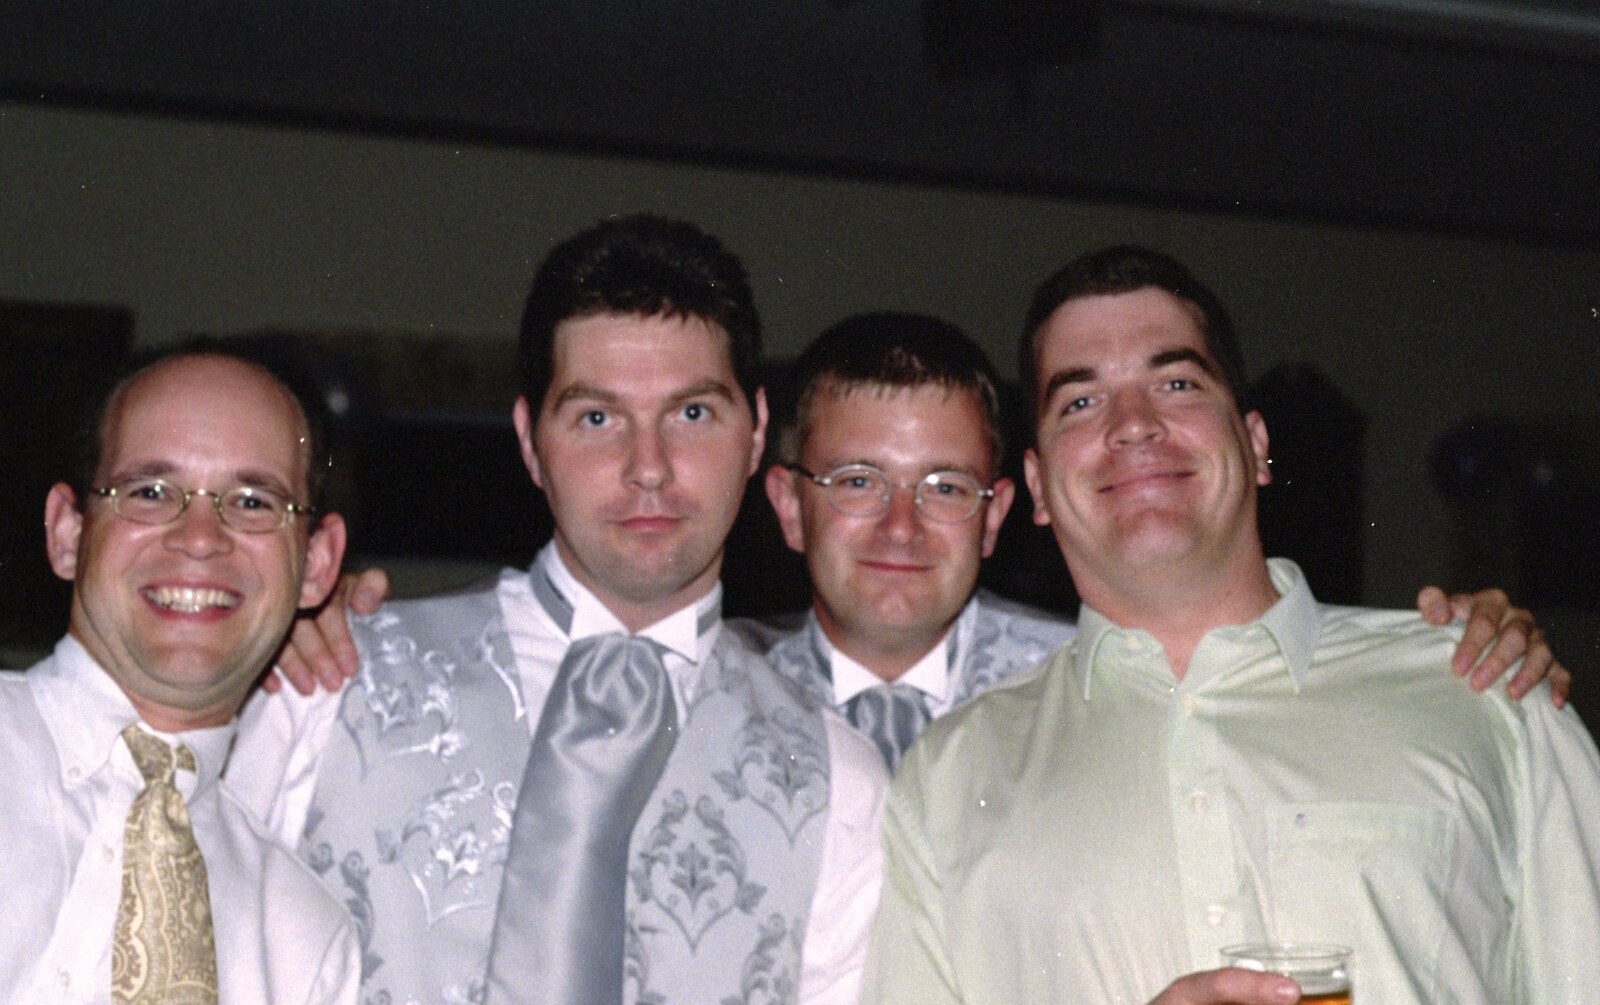 Phil, Sean, Nosher and Jon from Sean and Michelle's Wedding, Bashley FC, New Milton - 12th August 2000